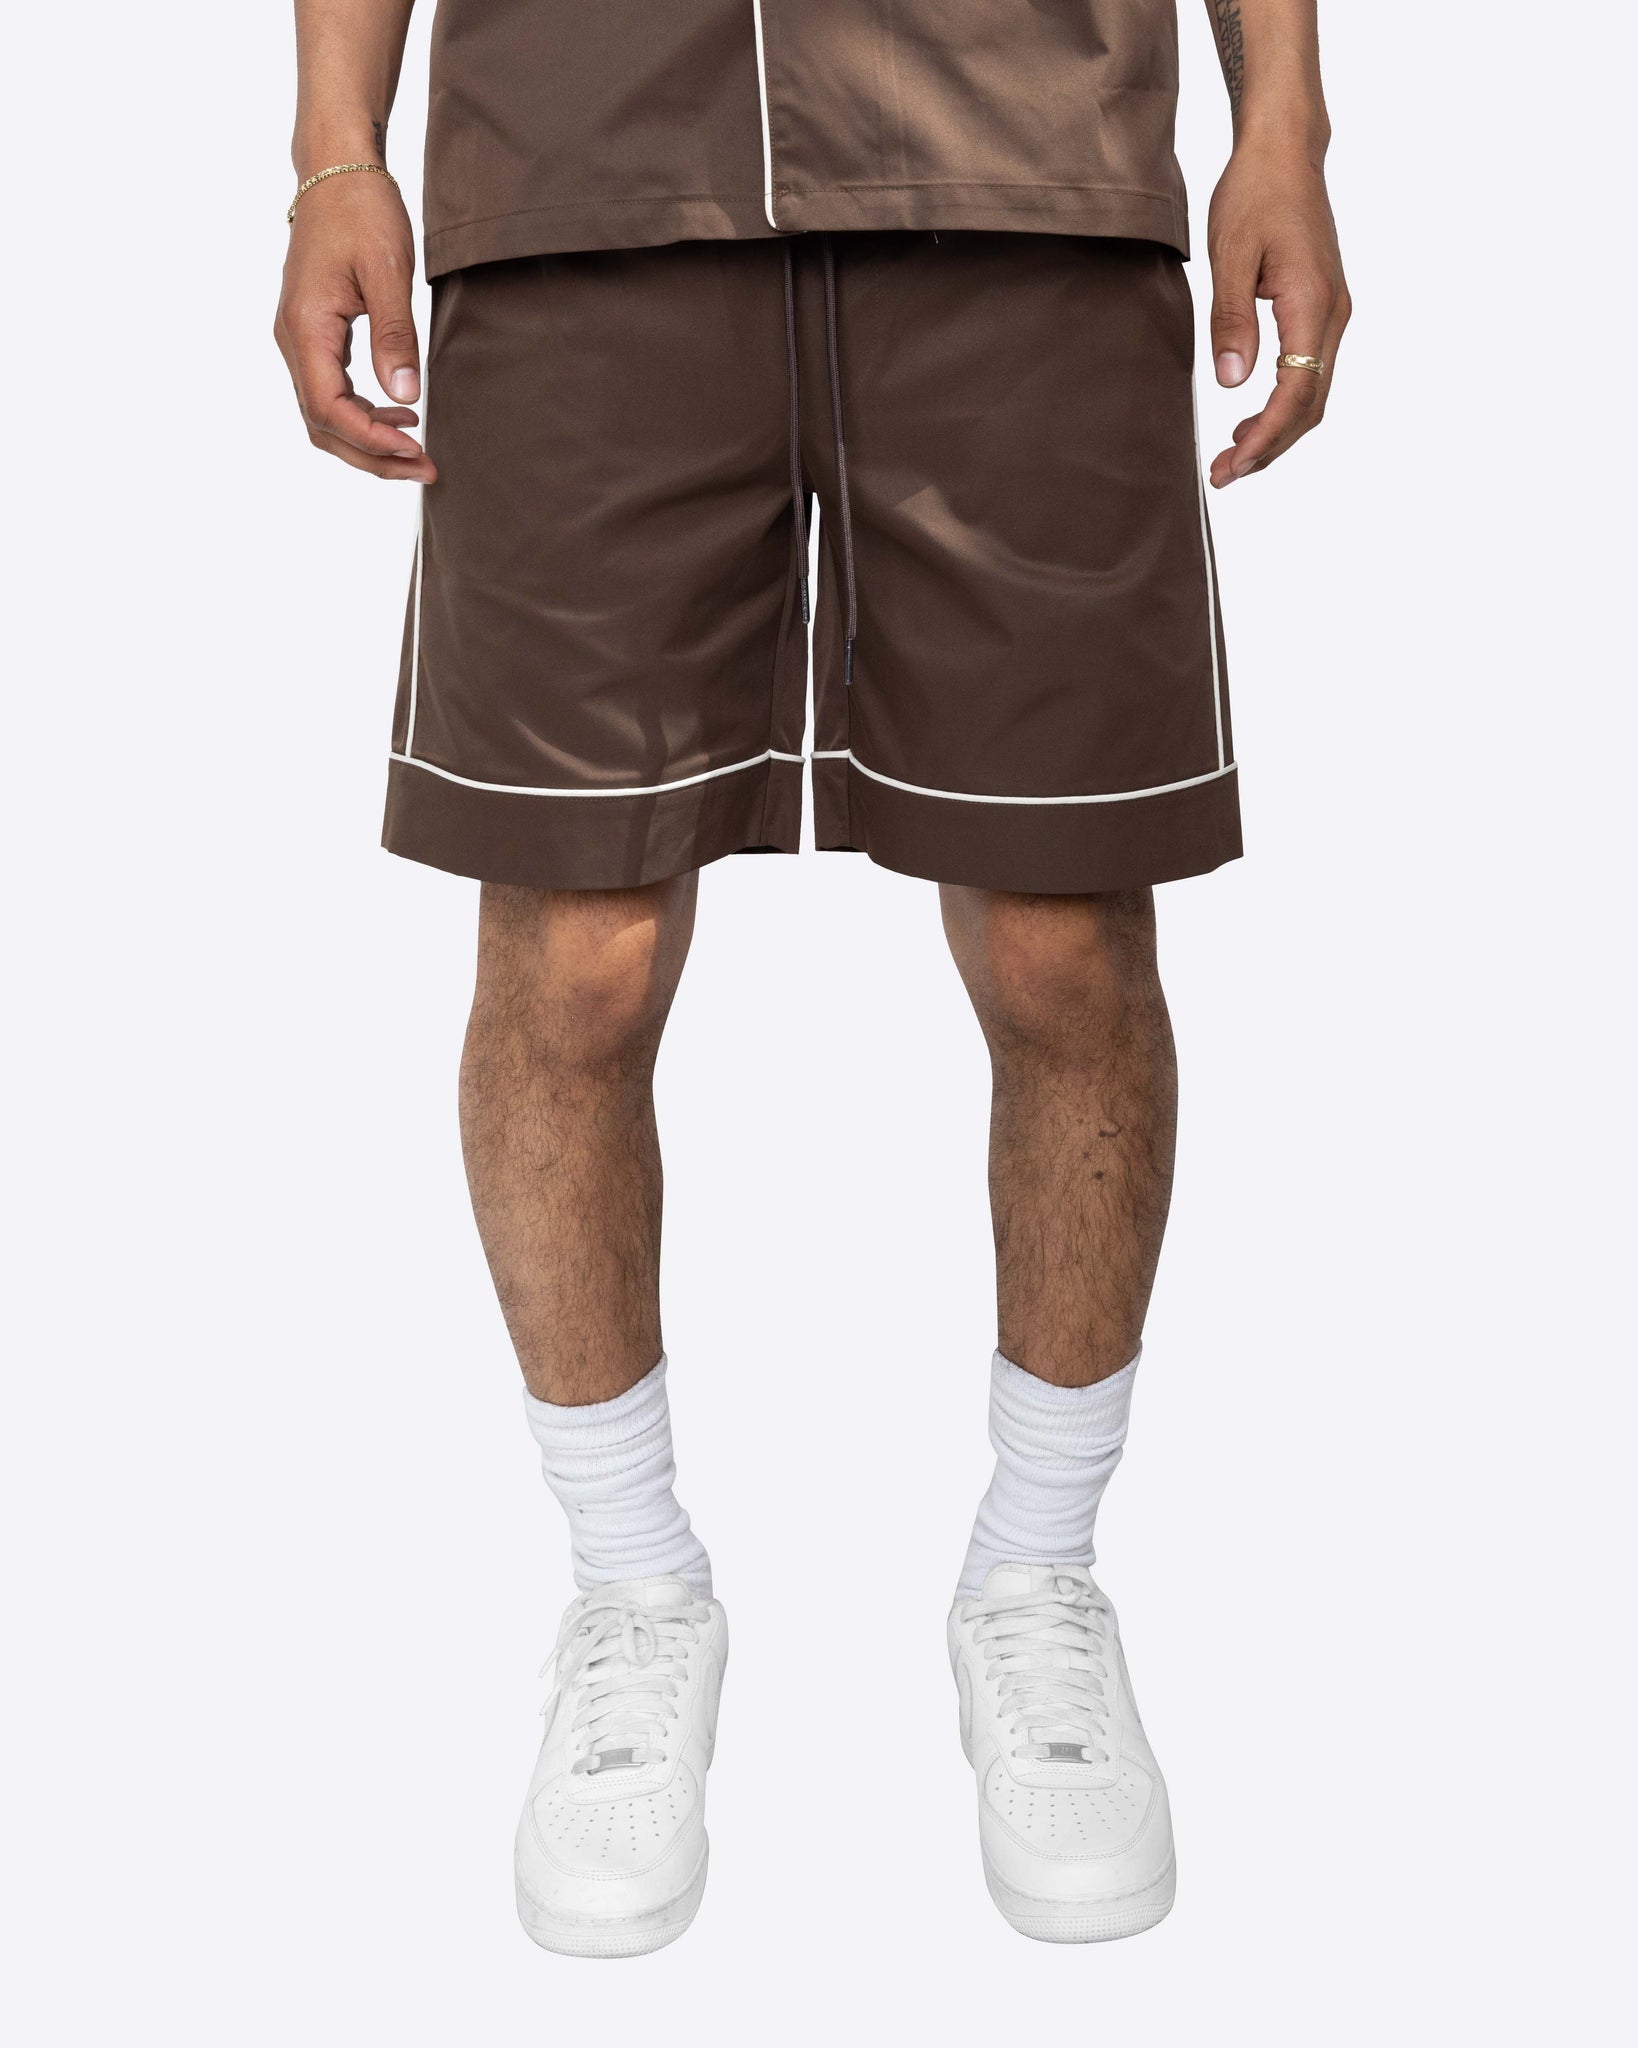 EPTM DOWNTOWN SHORTS-BROWN